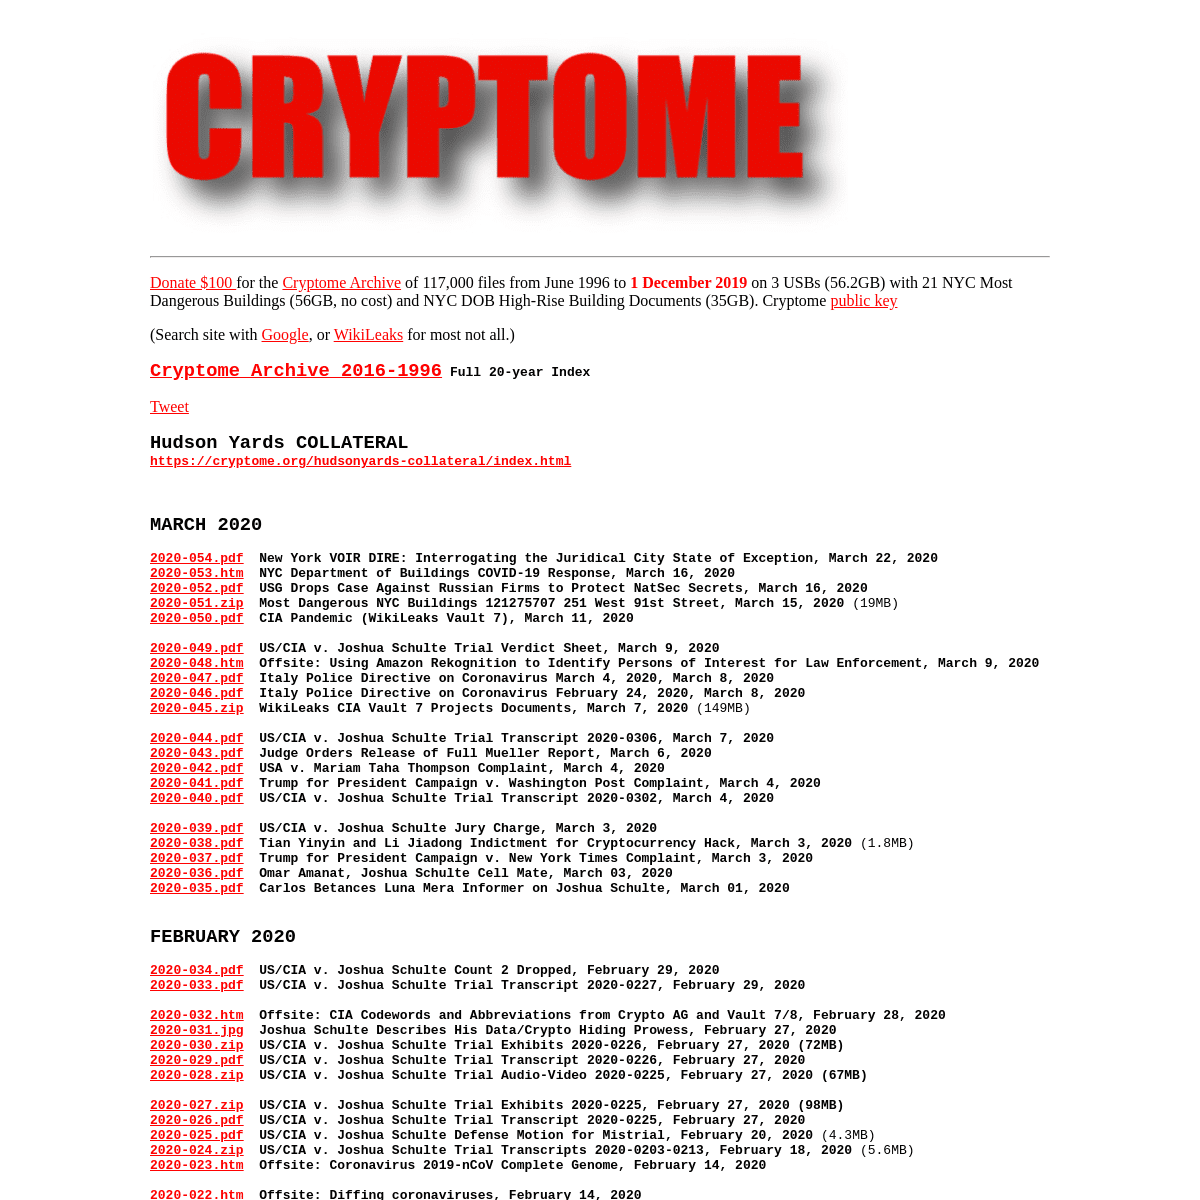 A complete backup of cryptome.org